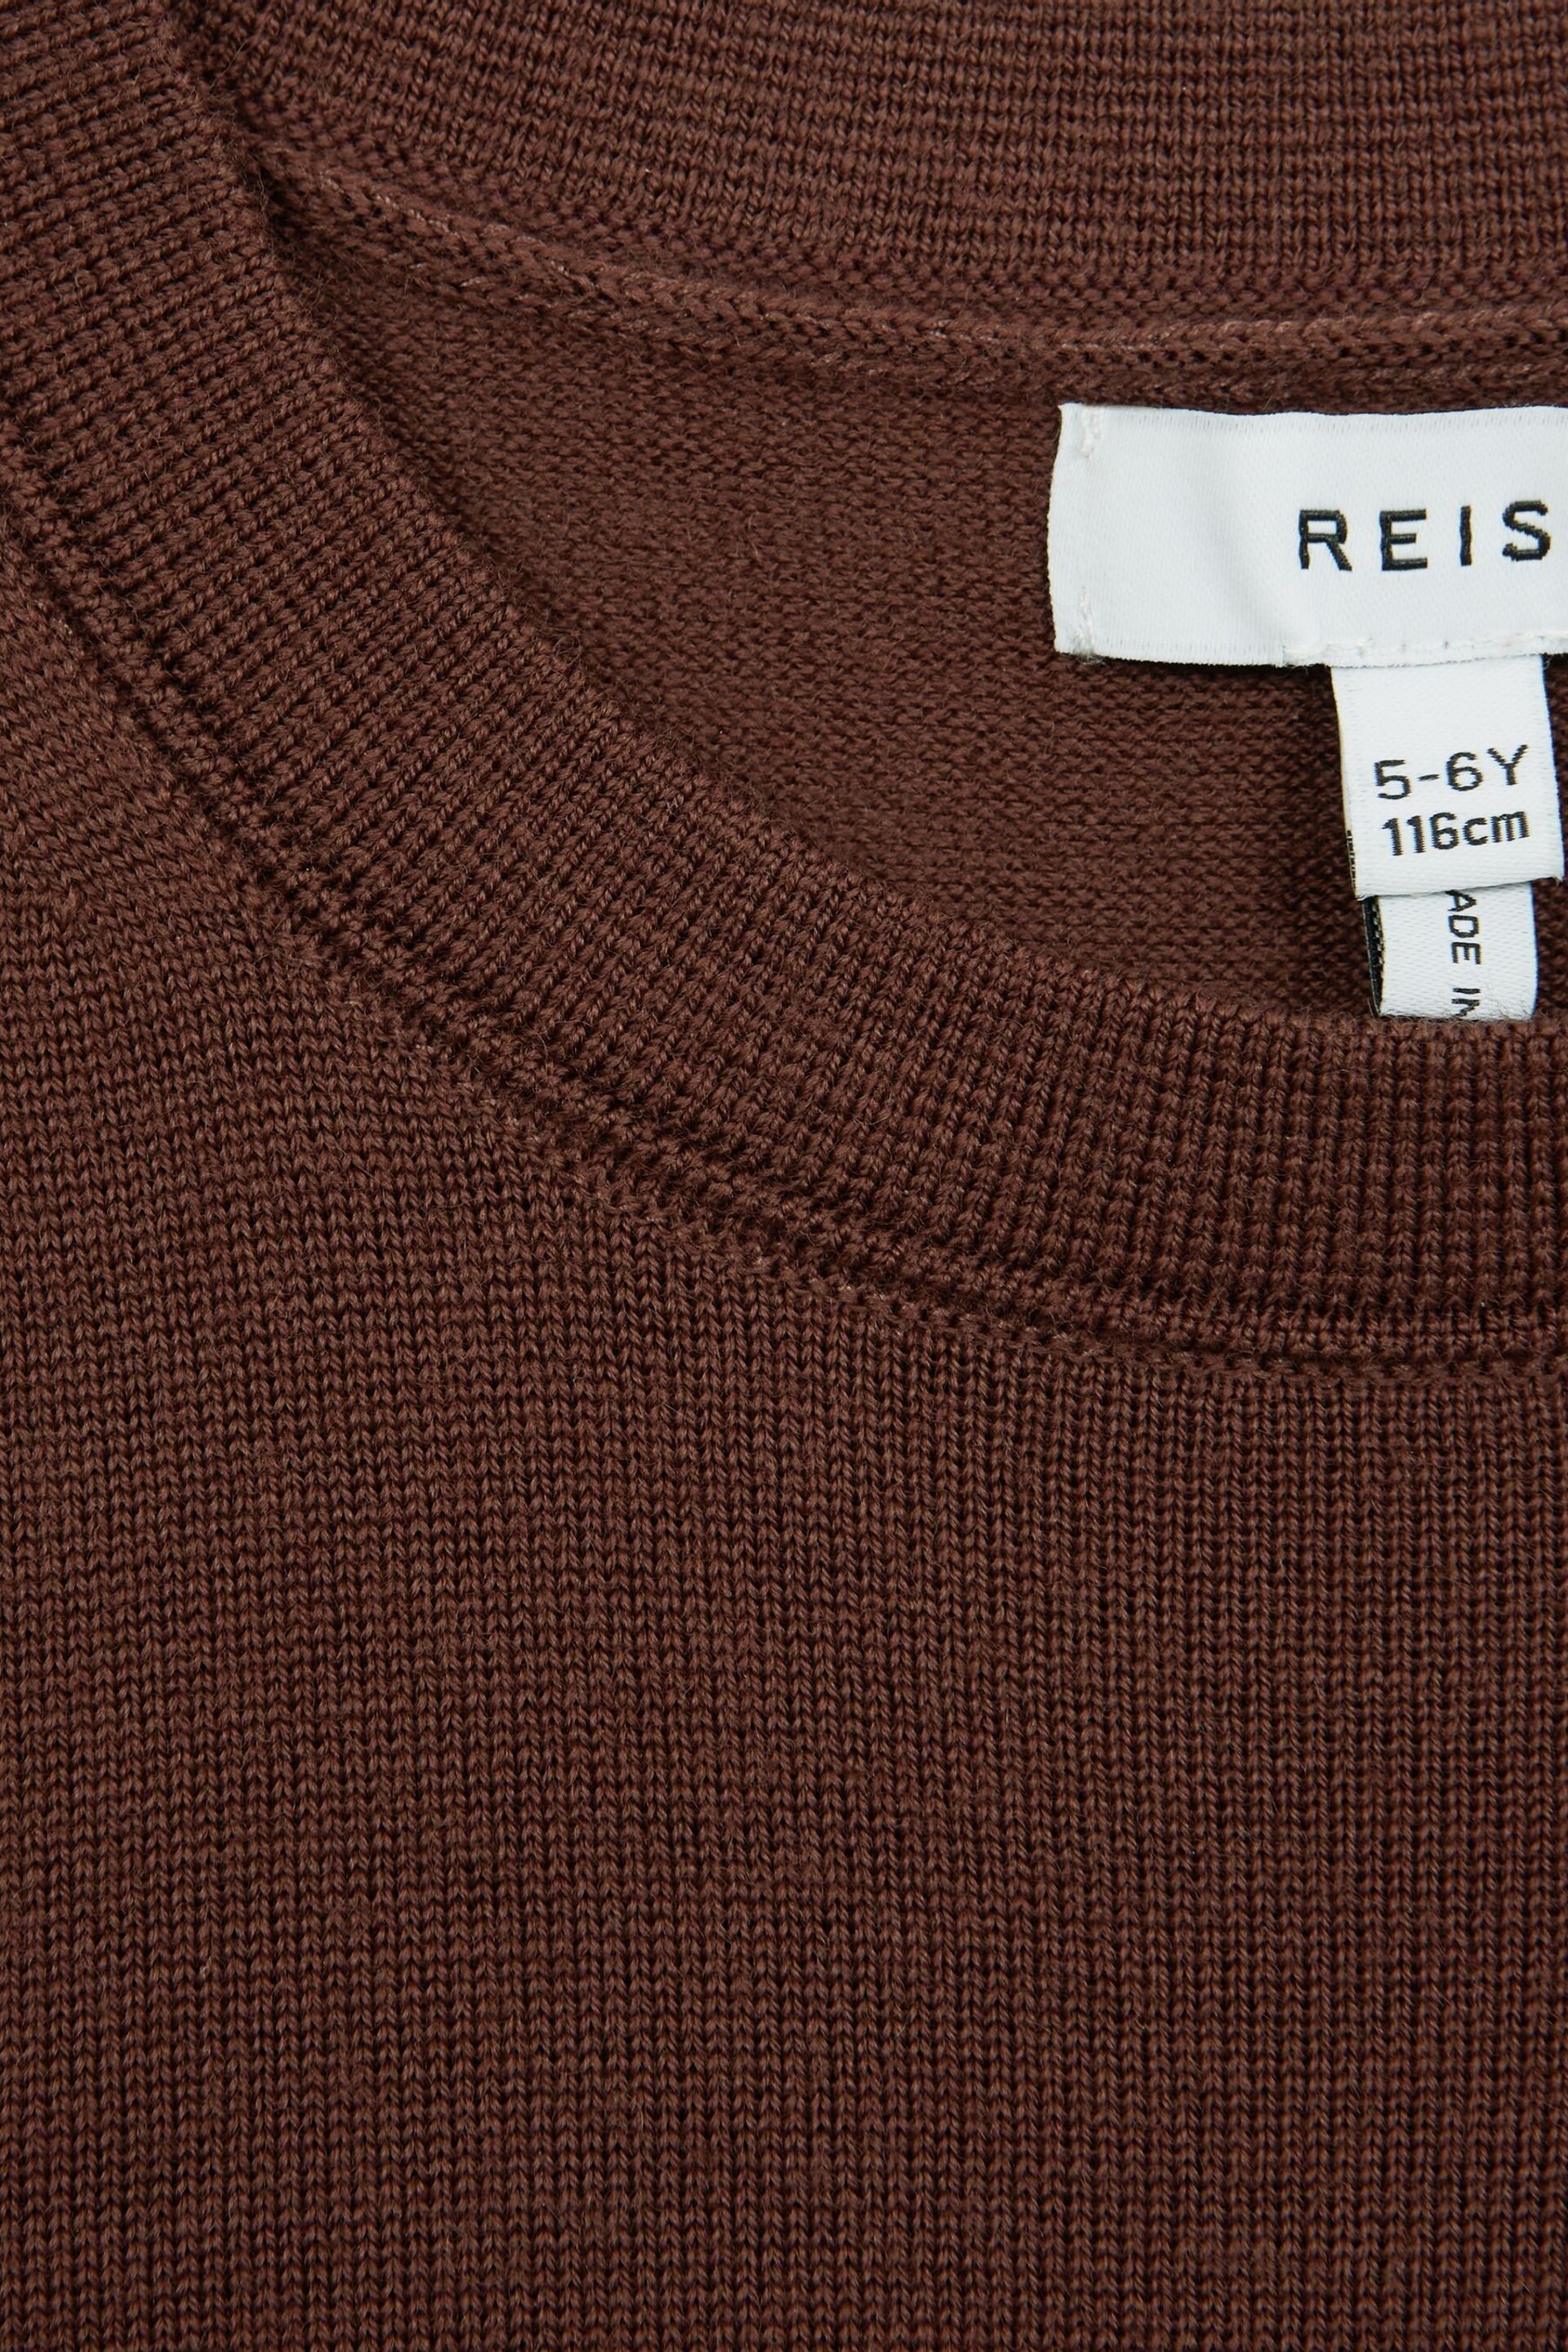 Reiss Rust Wessex Junior Crew Neck Knitted Jumper - Image 6 of 6